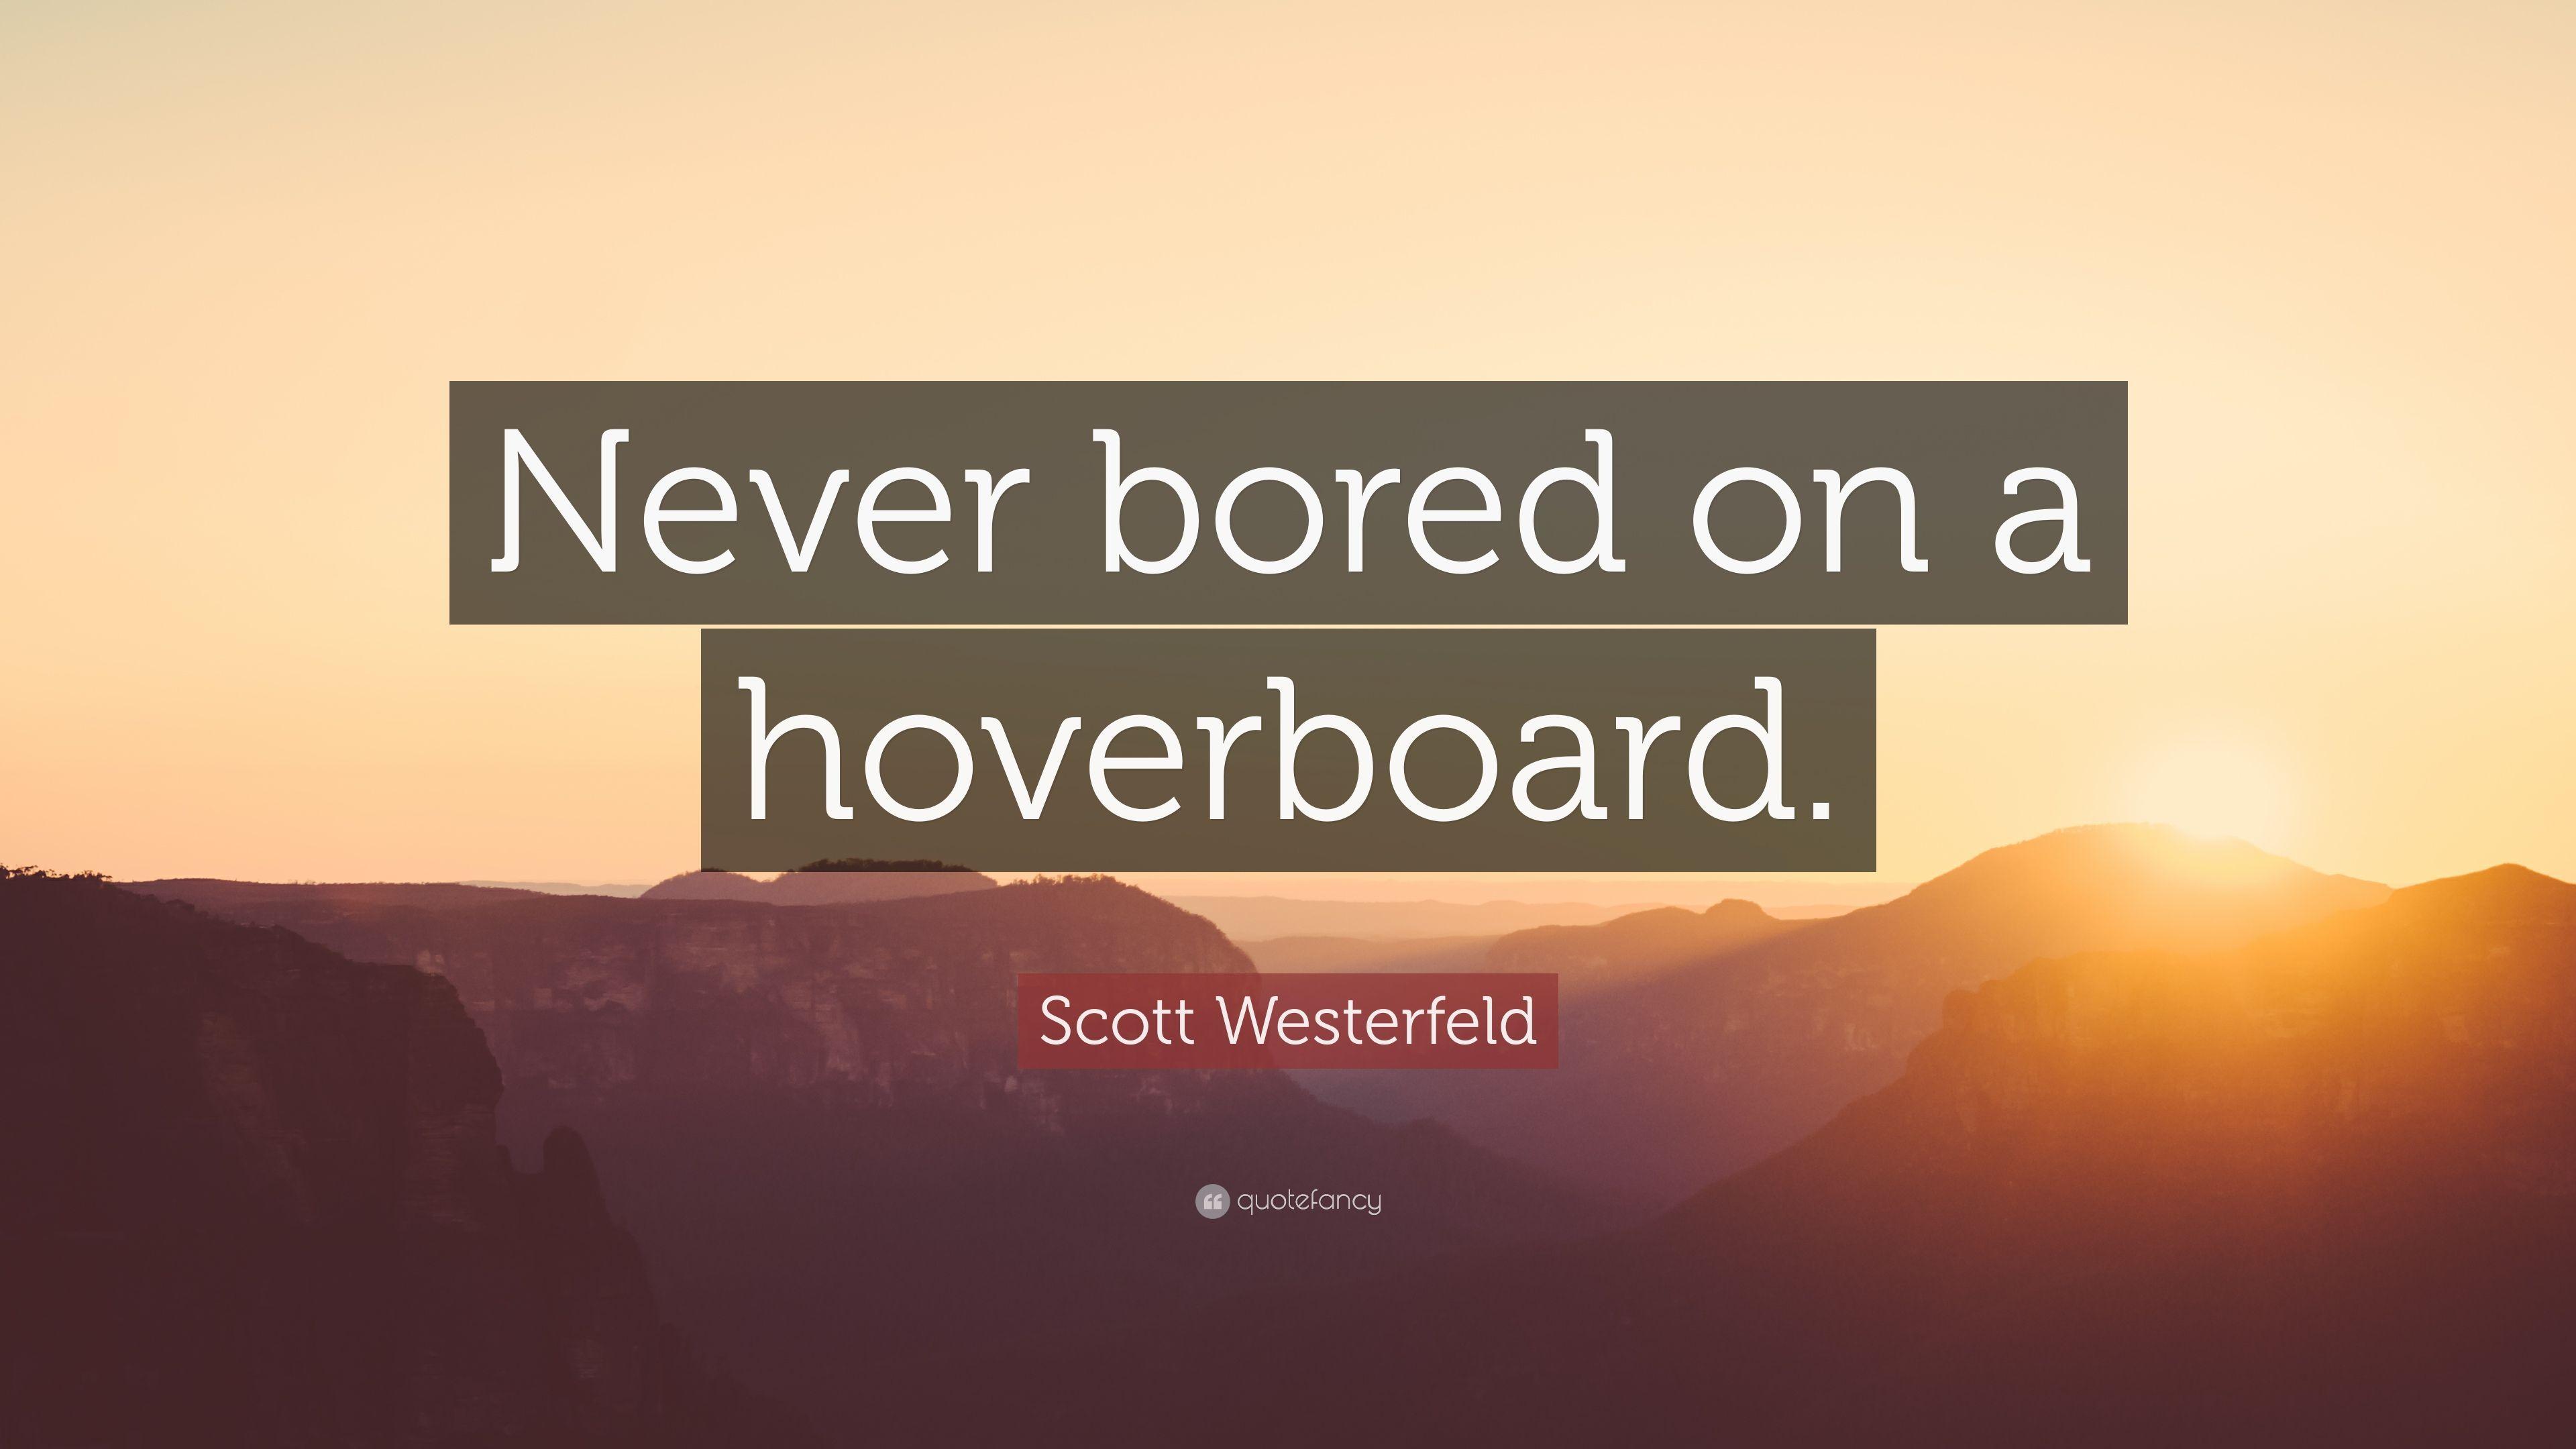 Scott Westerfeld Quote: “Never bored on a hoverboard.” 8